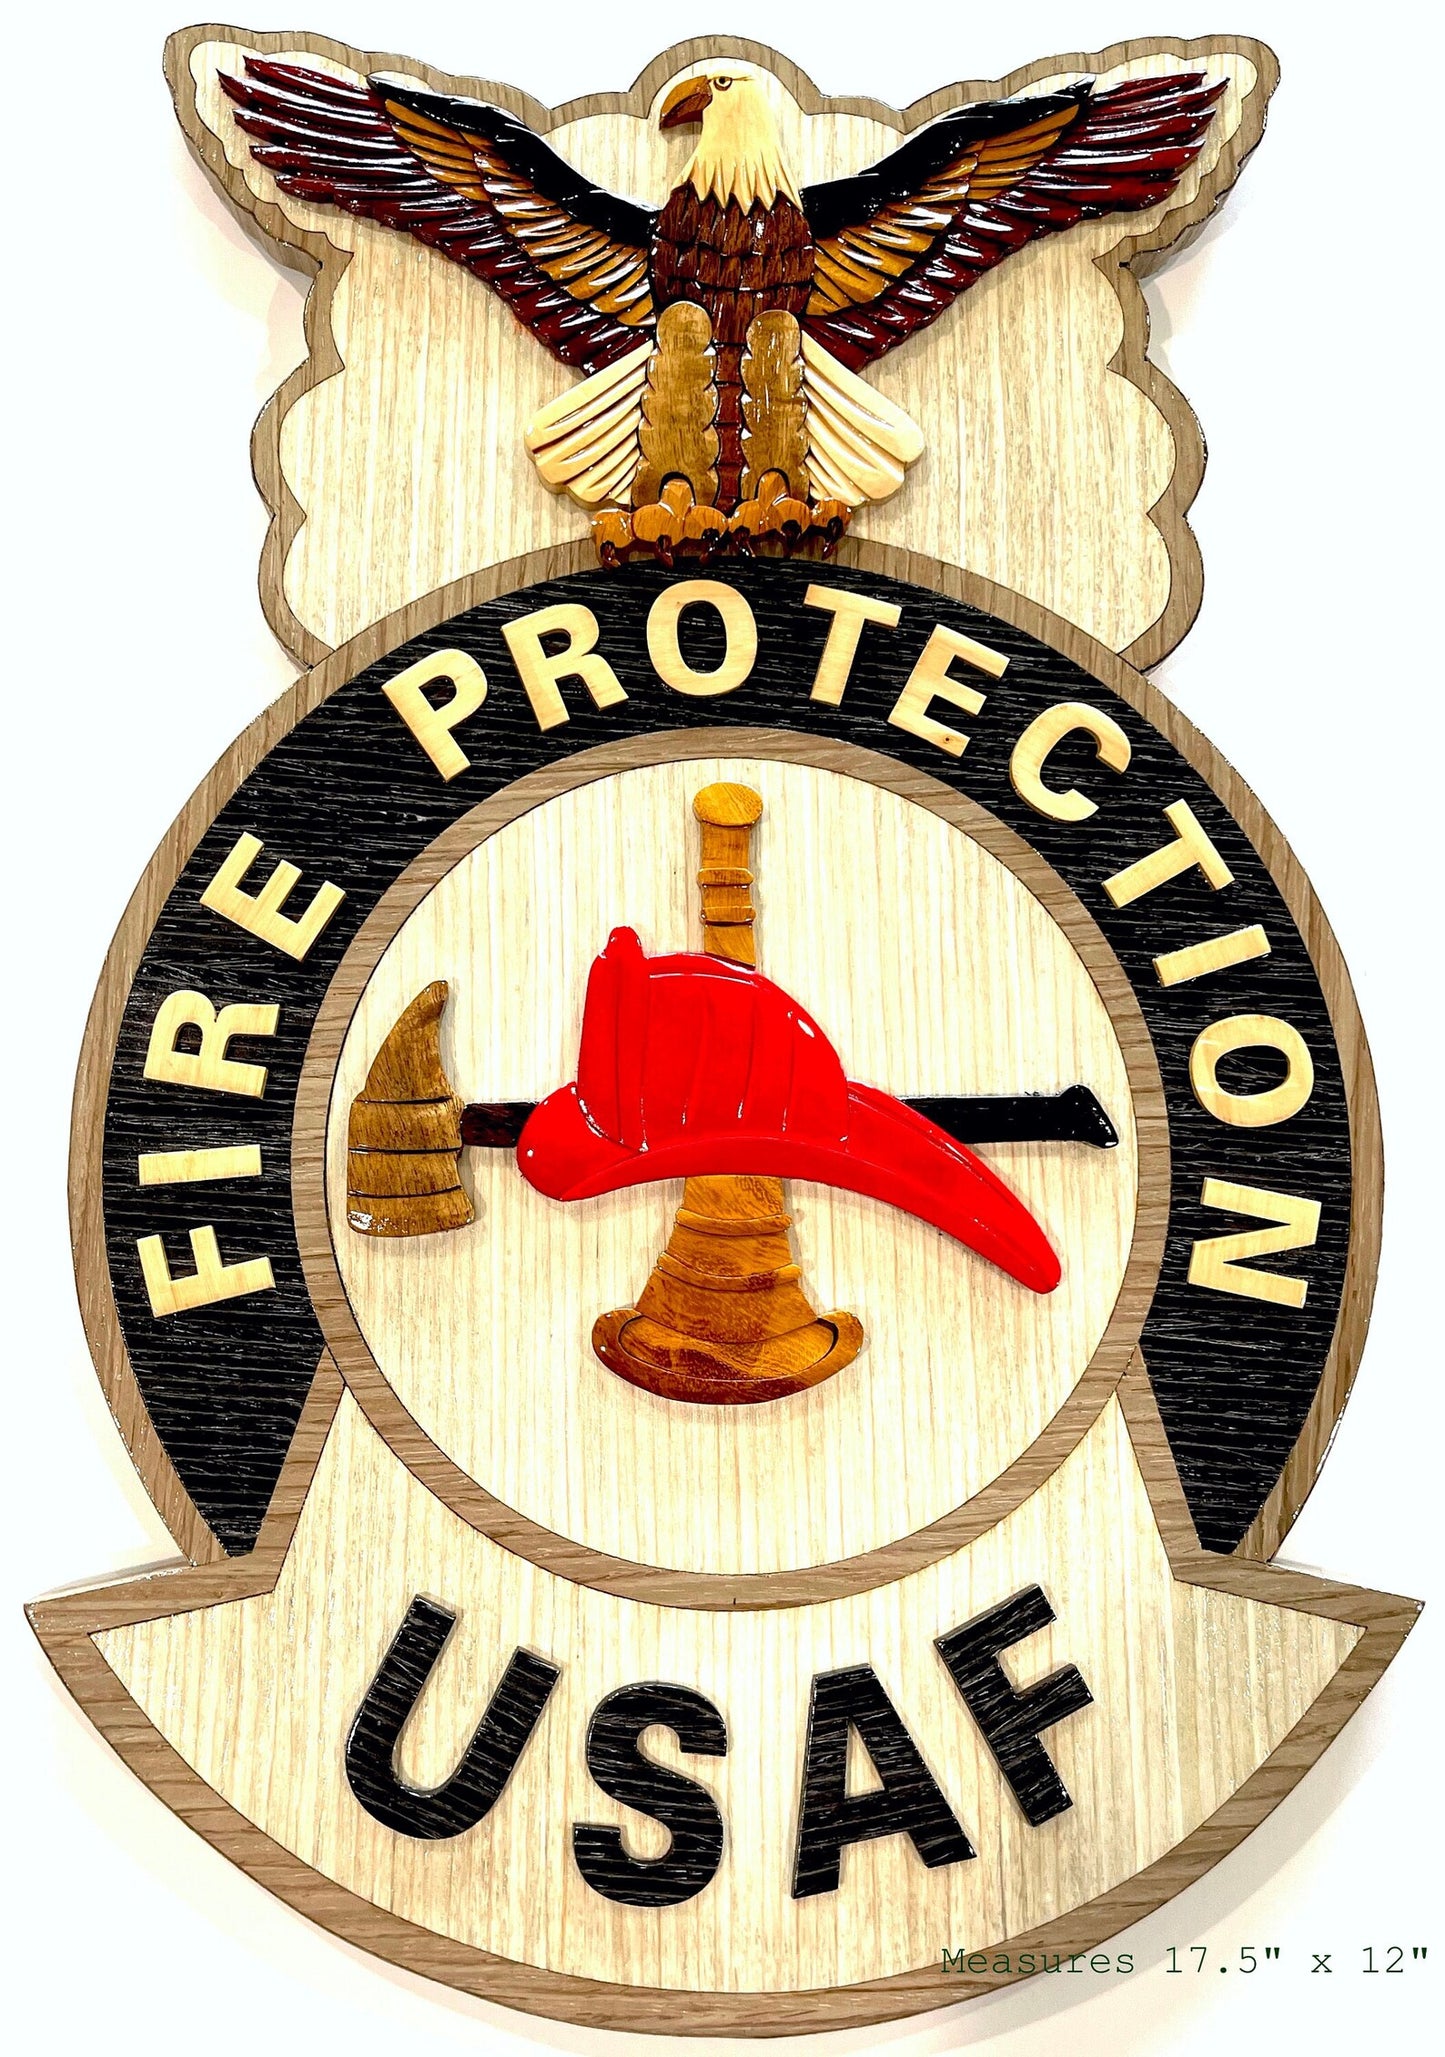 USAF FIRE PROTECTION BADGE WOOD ART PLAQUE